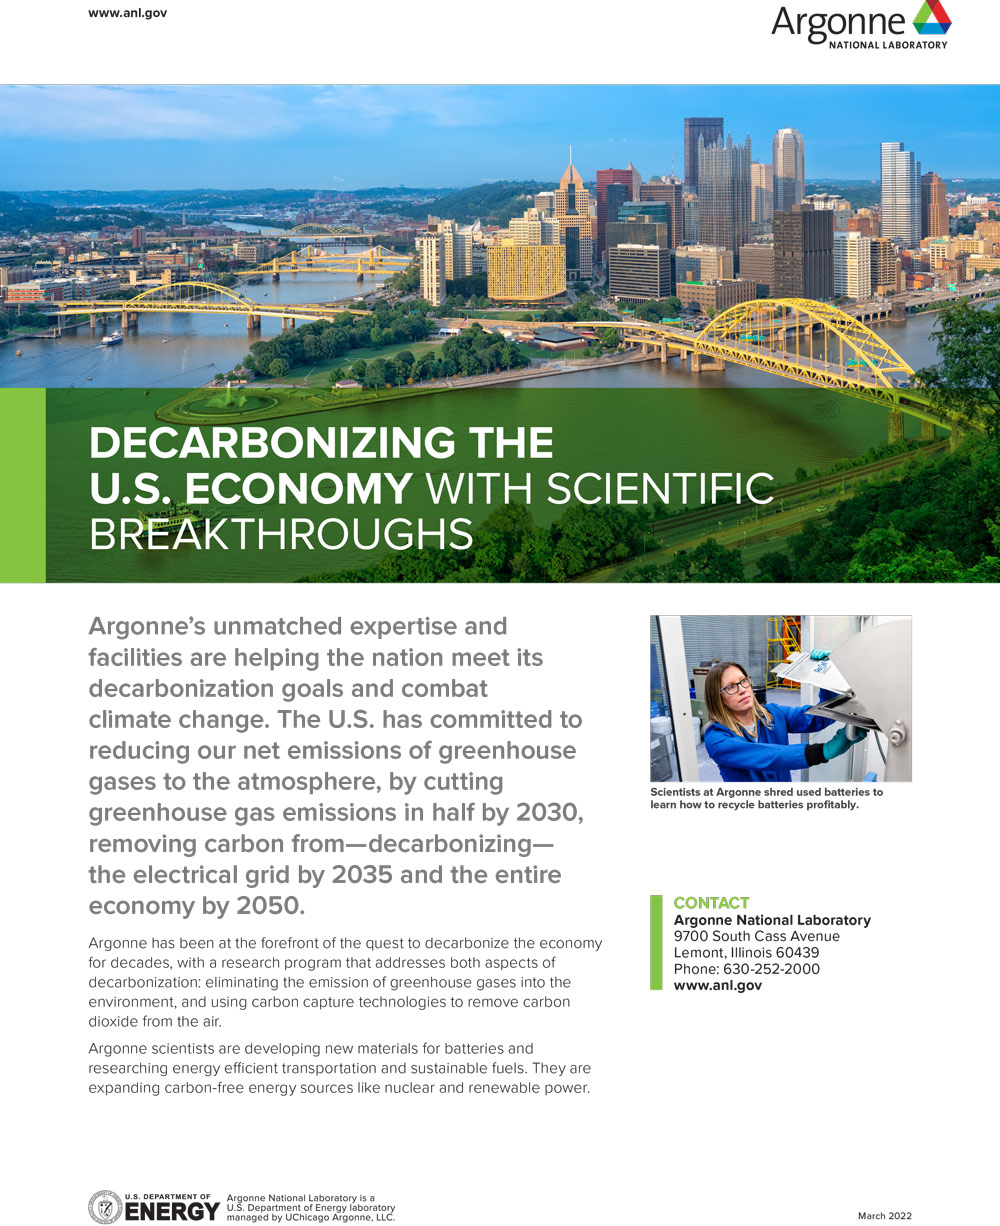 Screenshot of the first page of the Argonne Decarbonization Factsheet